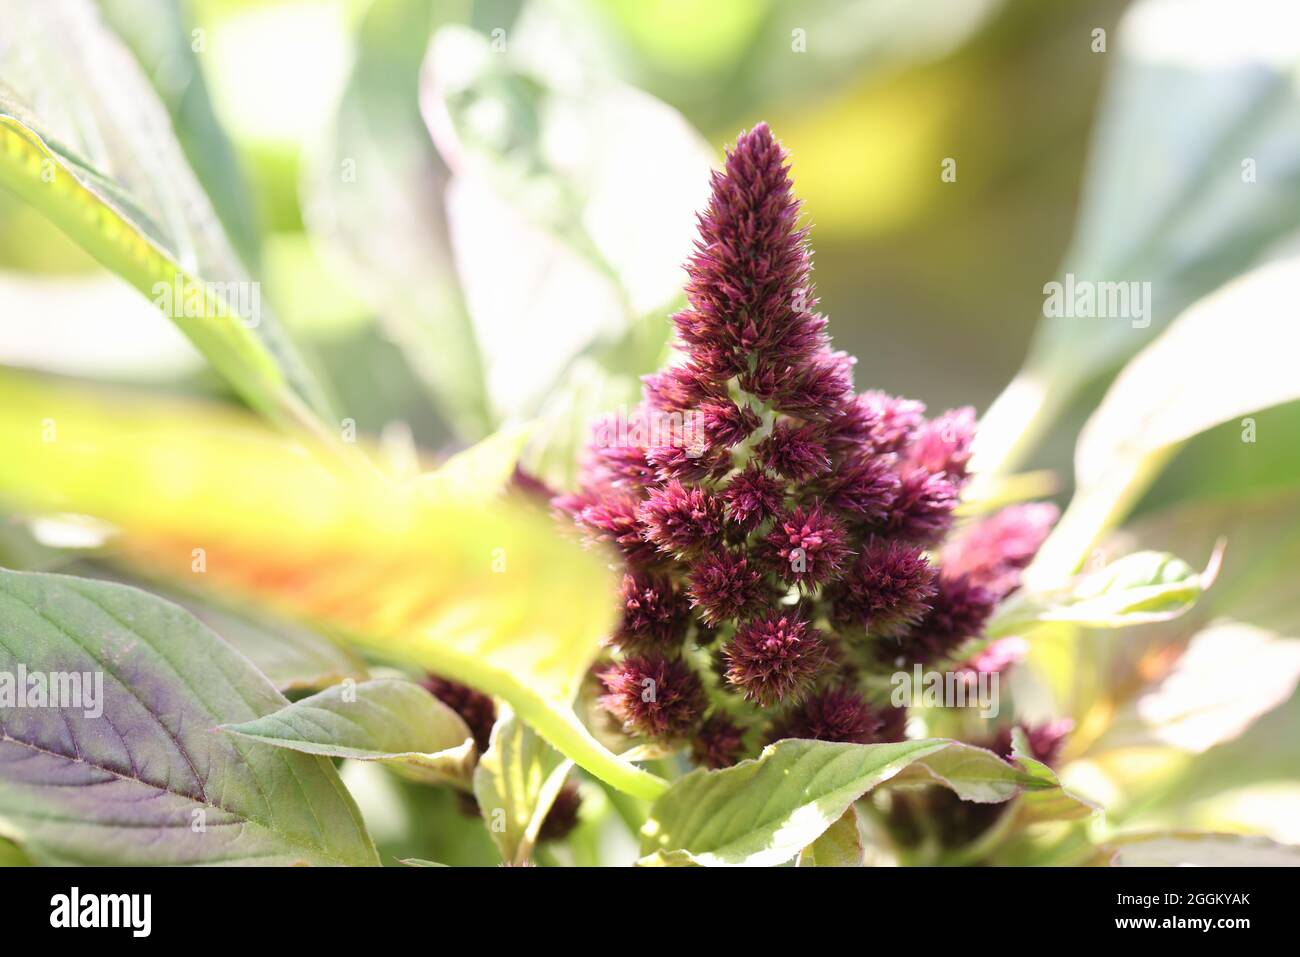 Beautiful flower comb or Celosia cristata with green leaves blooming in garden closeup Stock Photo